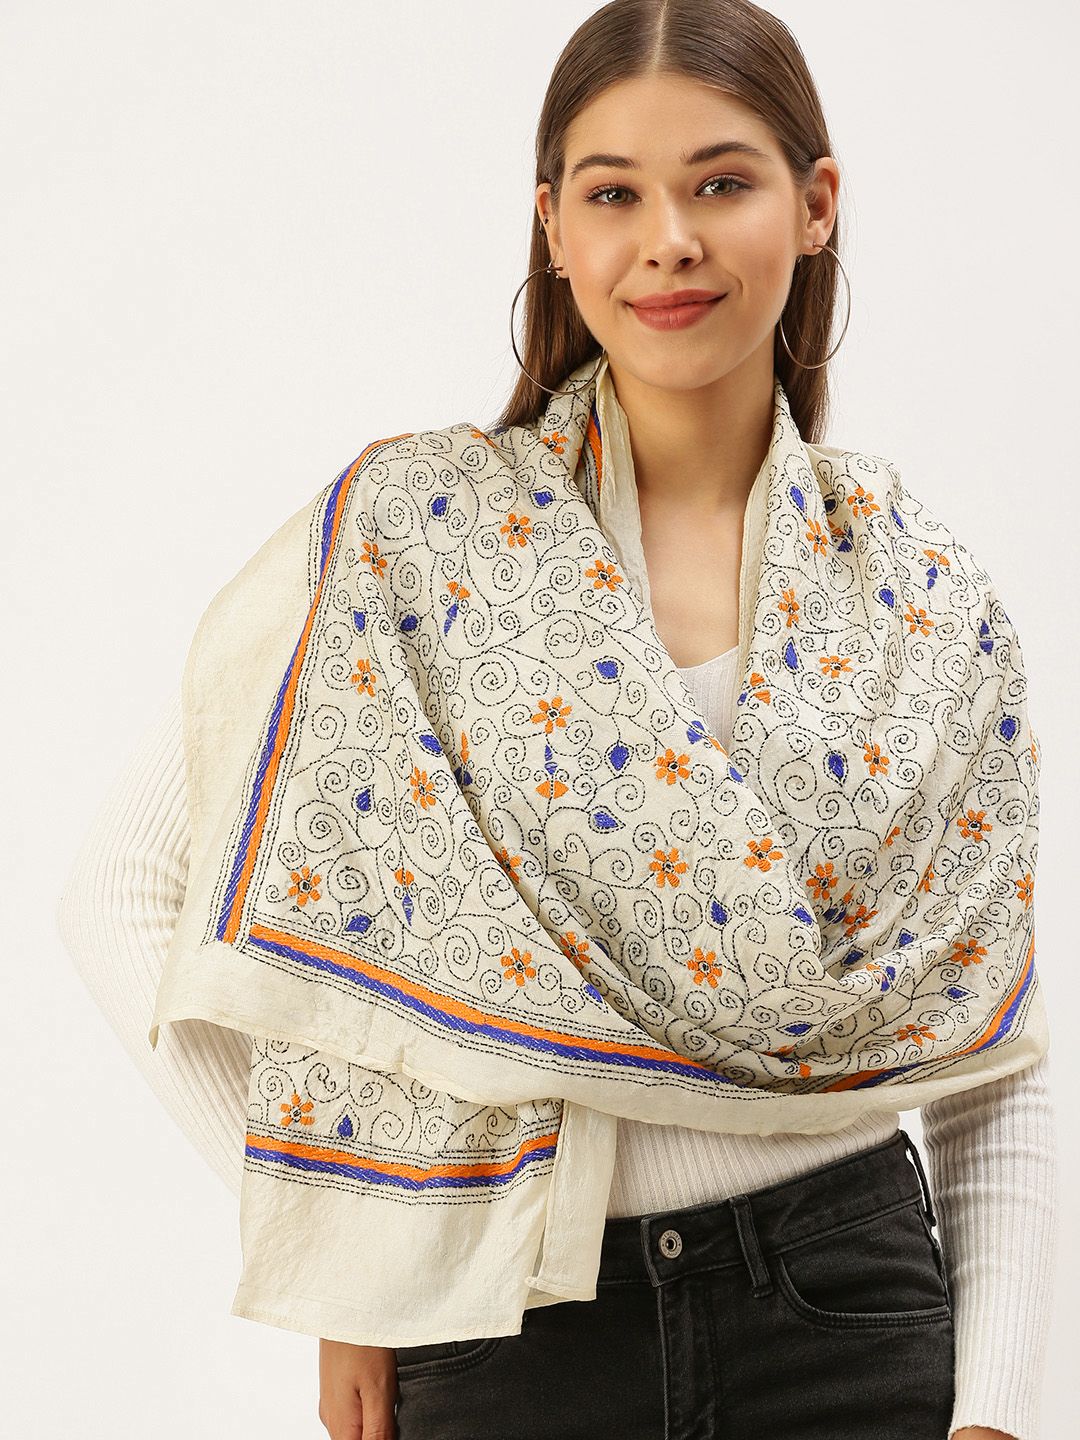 ArtEastri Women Cream-Coloured & Blue Kantha Embroidered Stole Price in India